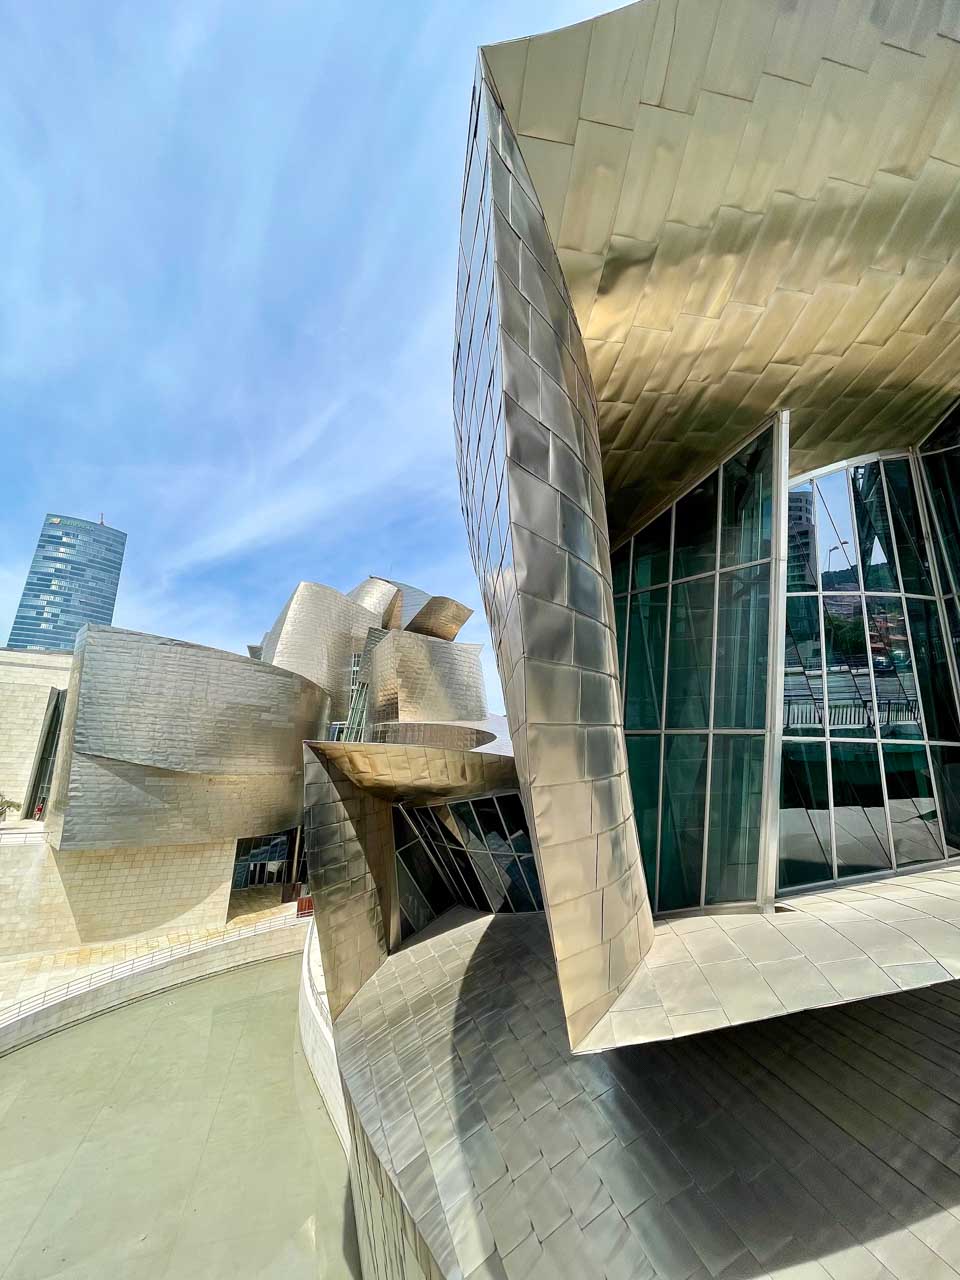 The silver-tiled side facade of the Bilbao Guggenheim Museum.